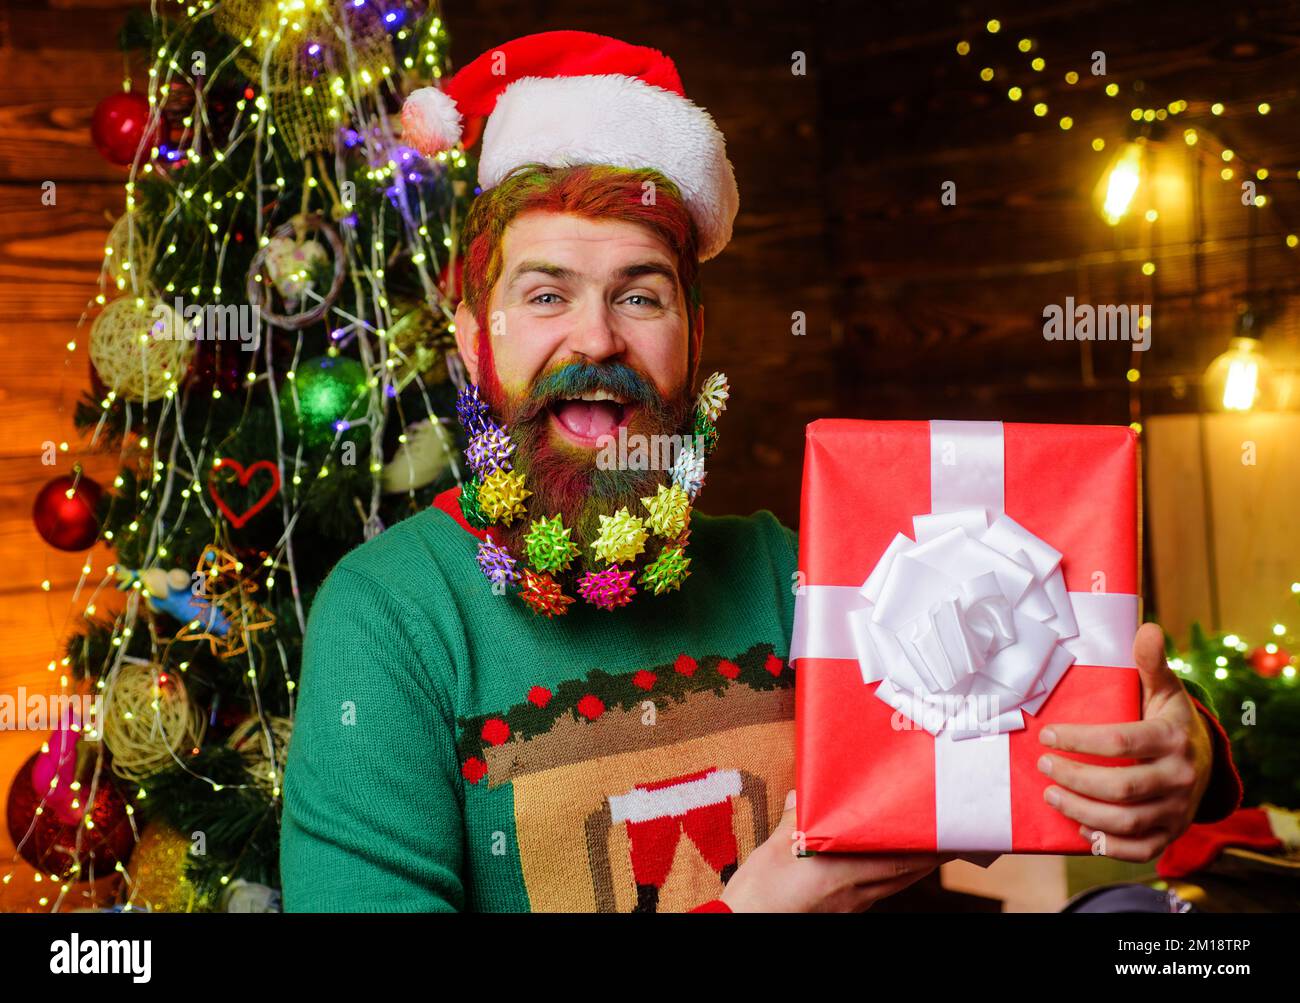 Bearded man in santa hat with decorated beard for New Year holiday holds Christmas gift present box. Stock Photo